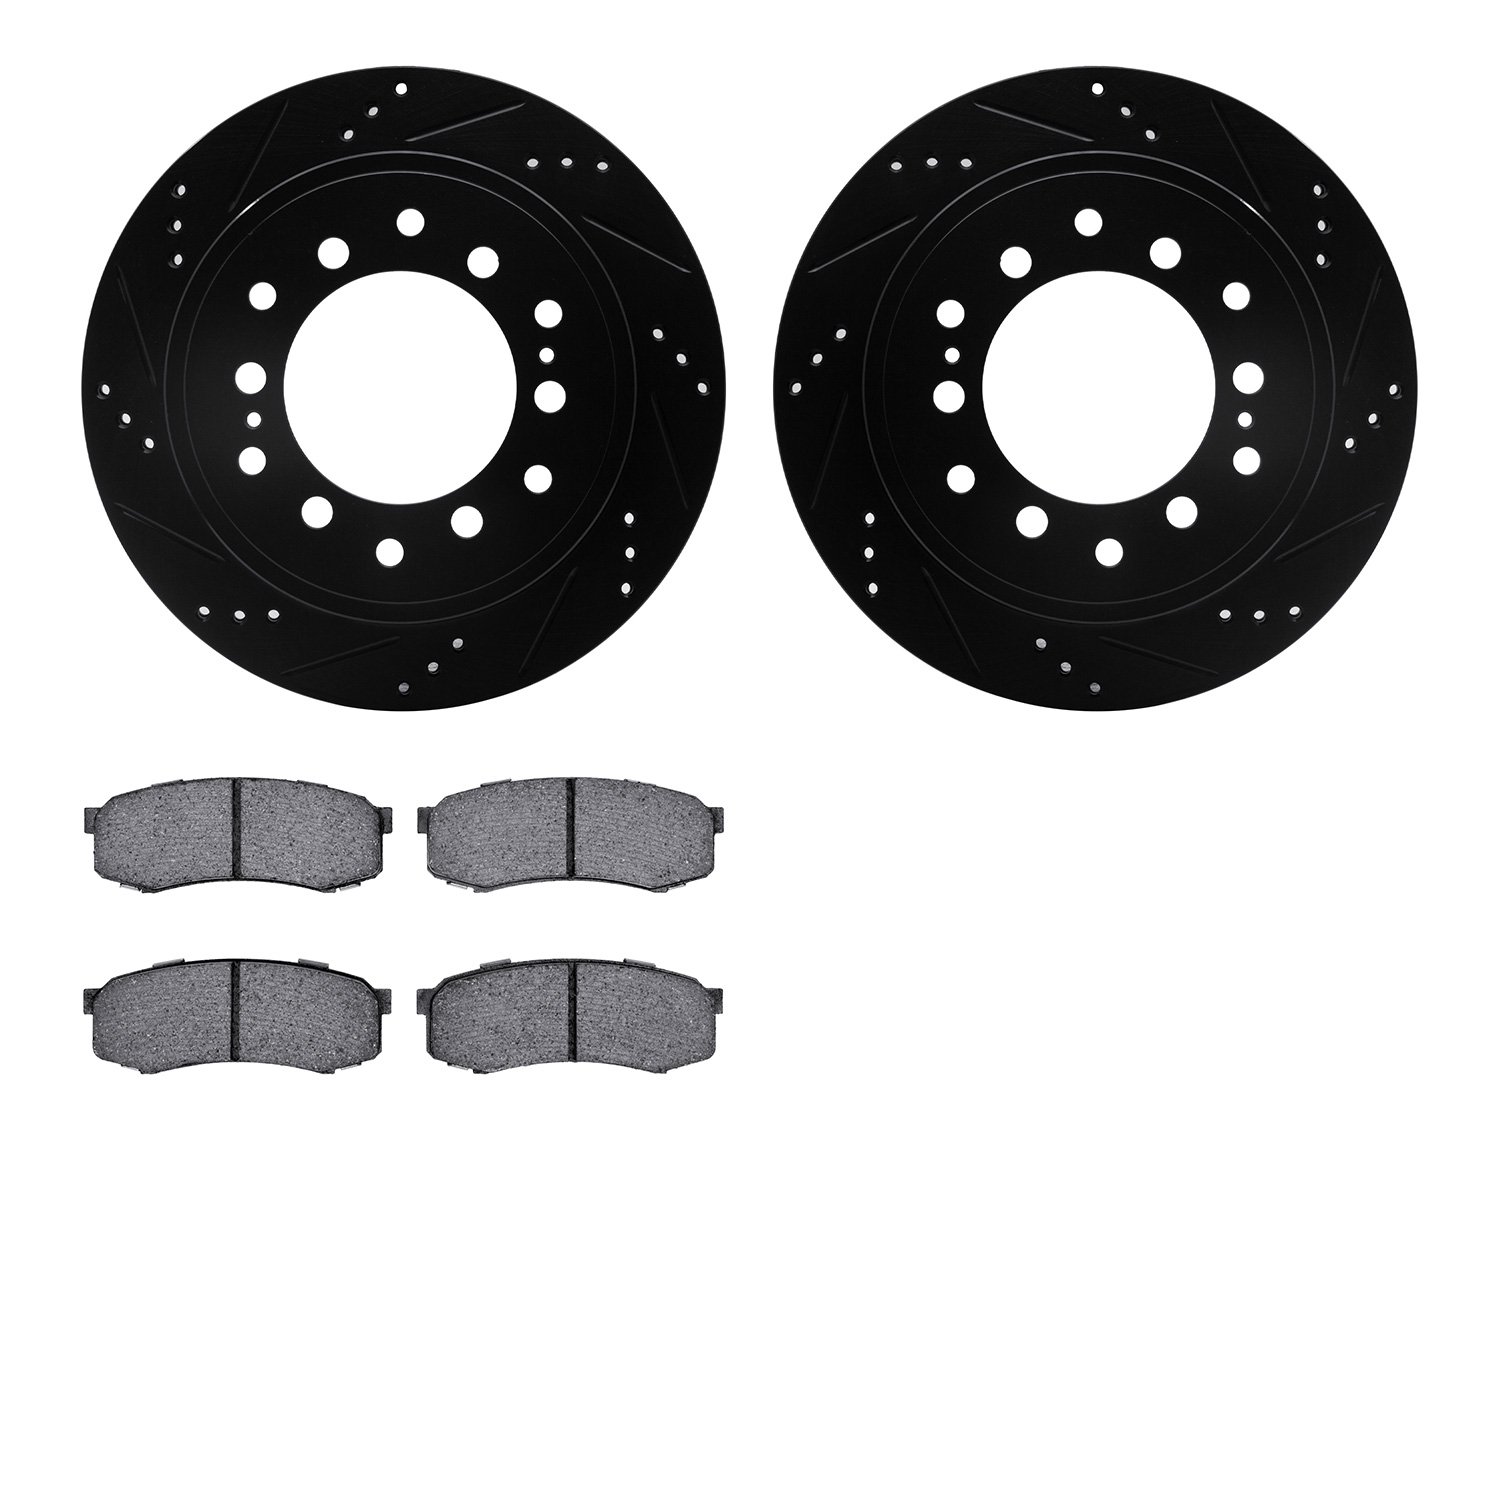 8402-76024 Drilled/Slotted Brake Rotors with Ultimate-Duty Brake Pads Kit [Black], Fits Select Lexus/Toyota/Scion, Position: Rea